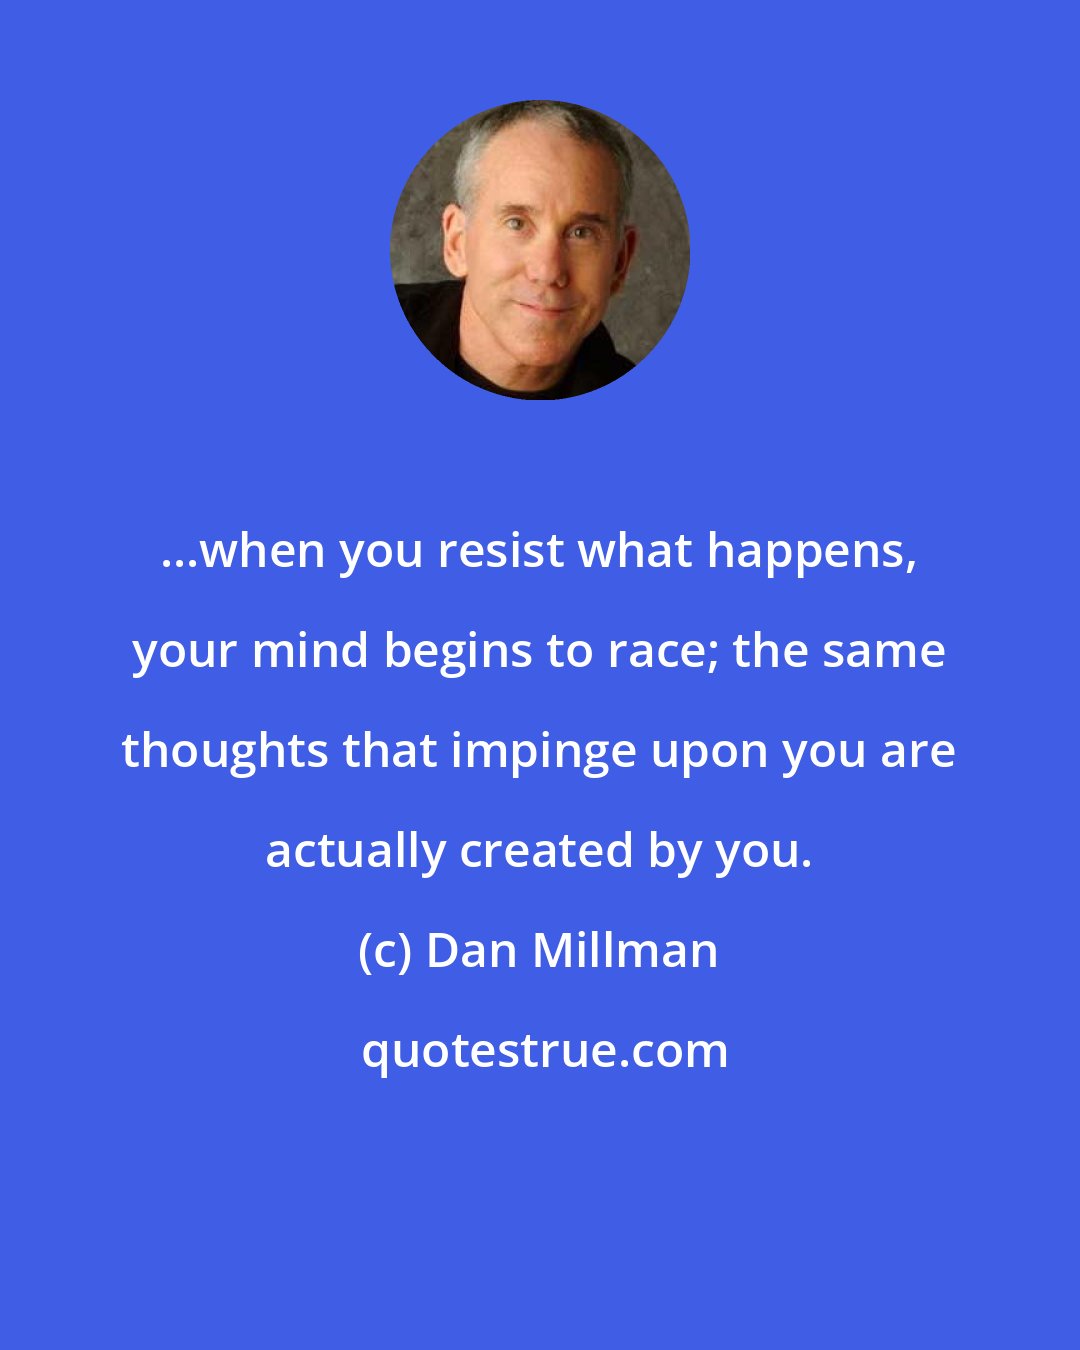 Dan Millman: ...when you resist what happens, your mind begins to race; the same thoughts that impinge upon you are actually created by you.